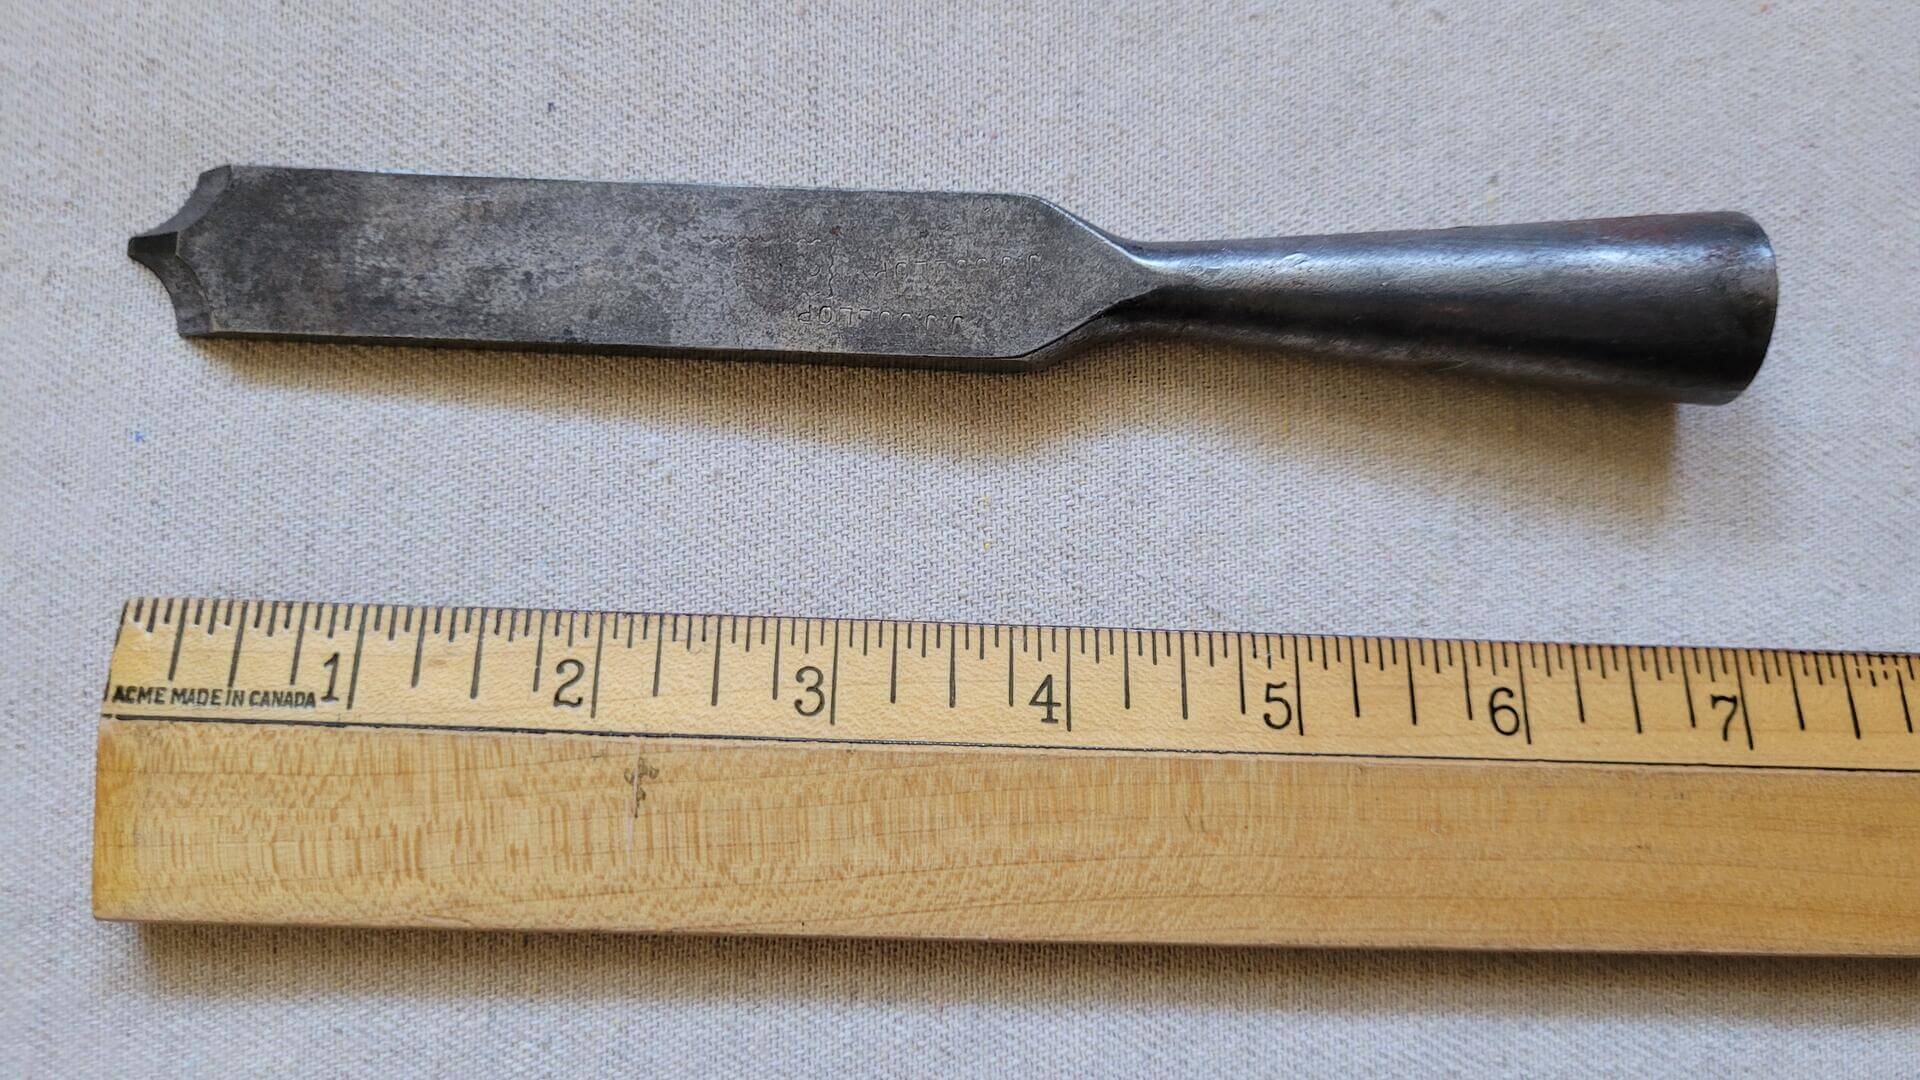 Rare antique winged-v pointed socket type woodworking chisel 7 inches long with the unclear brand stamp and owner's markings. Vintage unusual collectible wood carving, turning, and engraving chisel